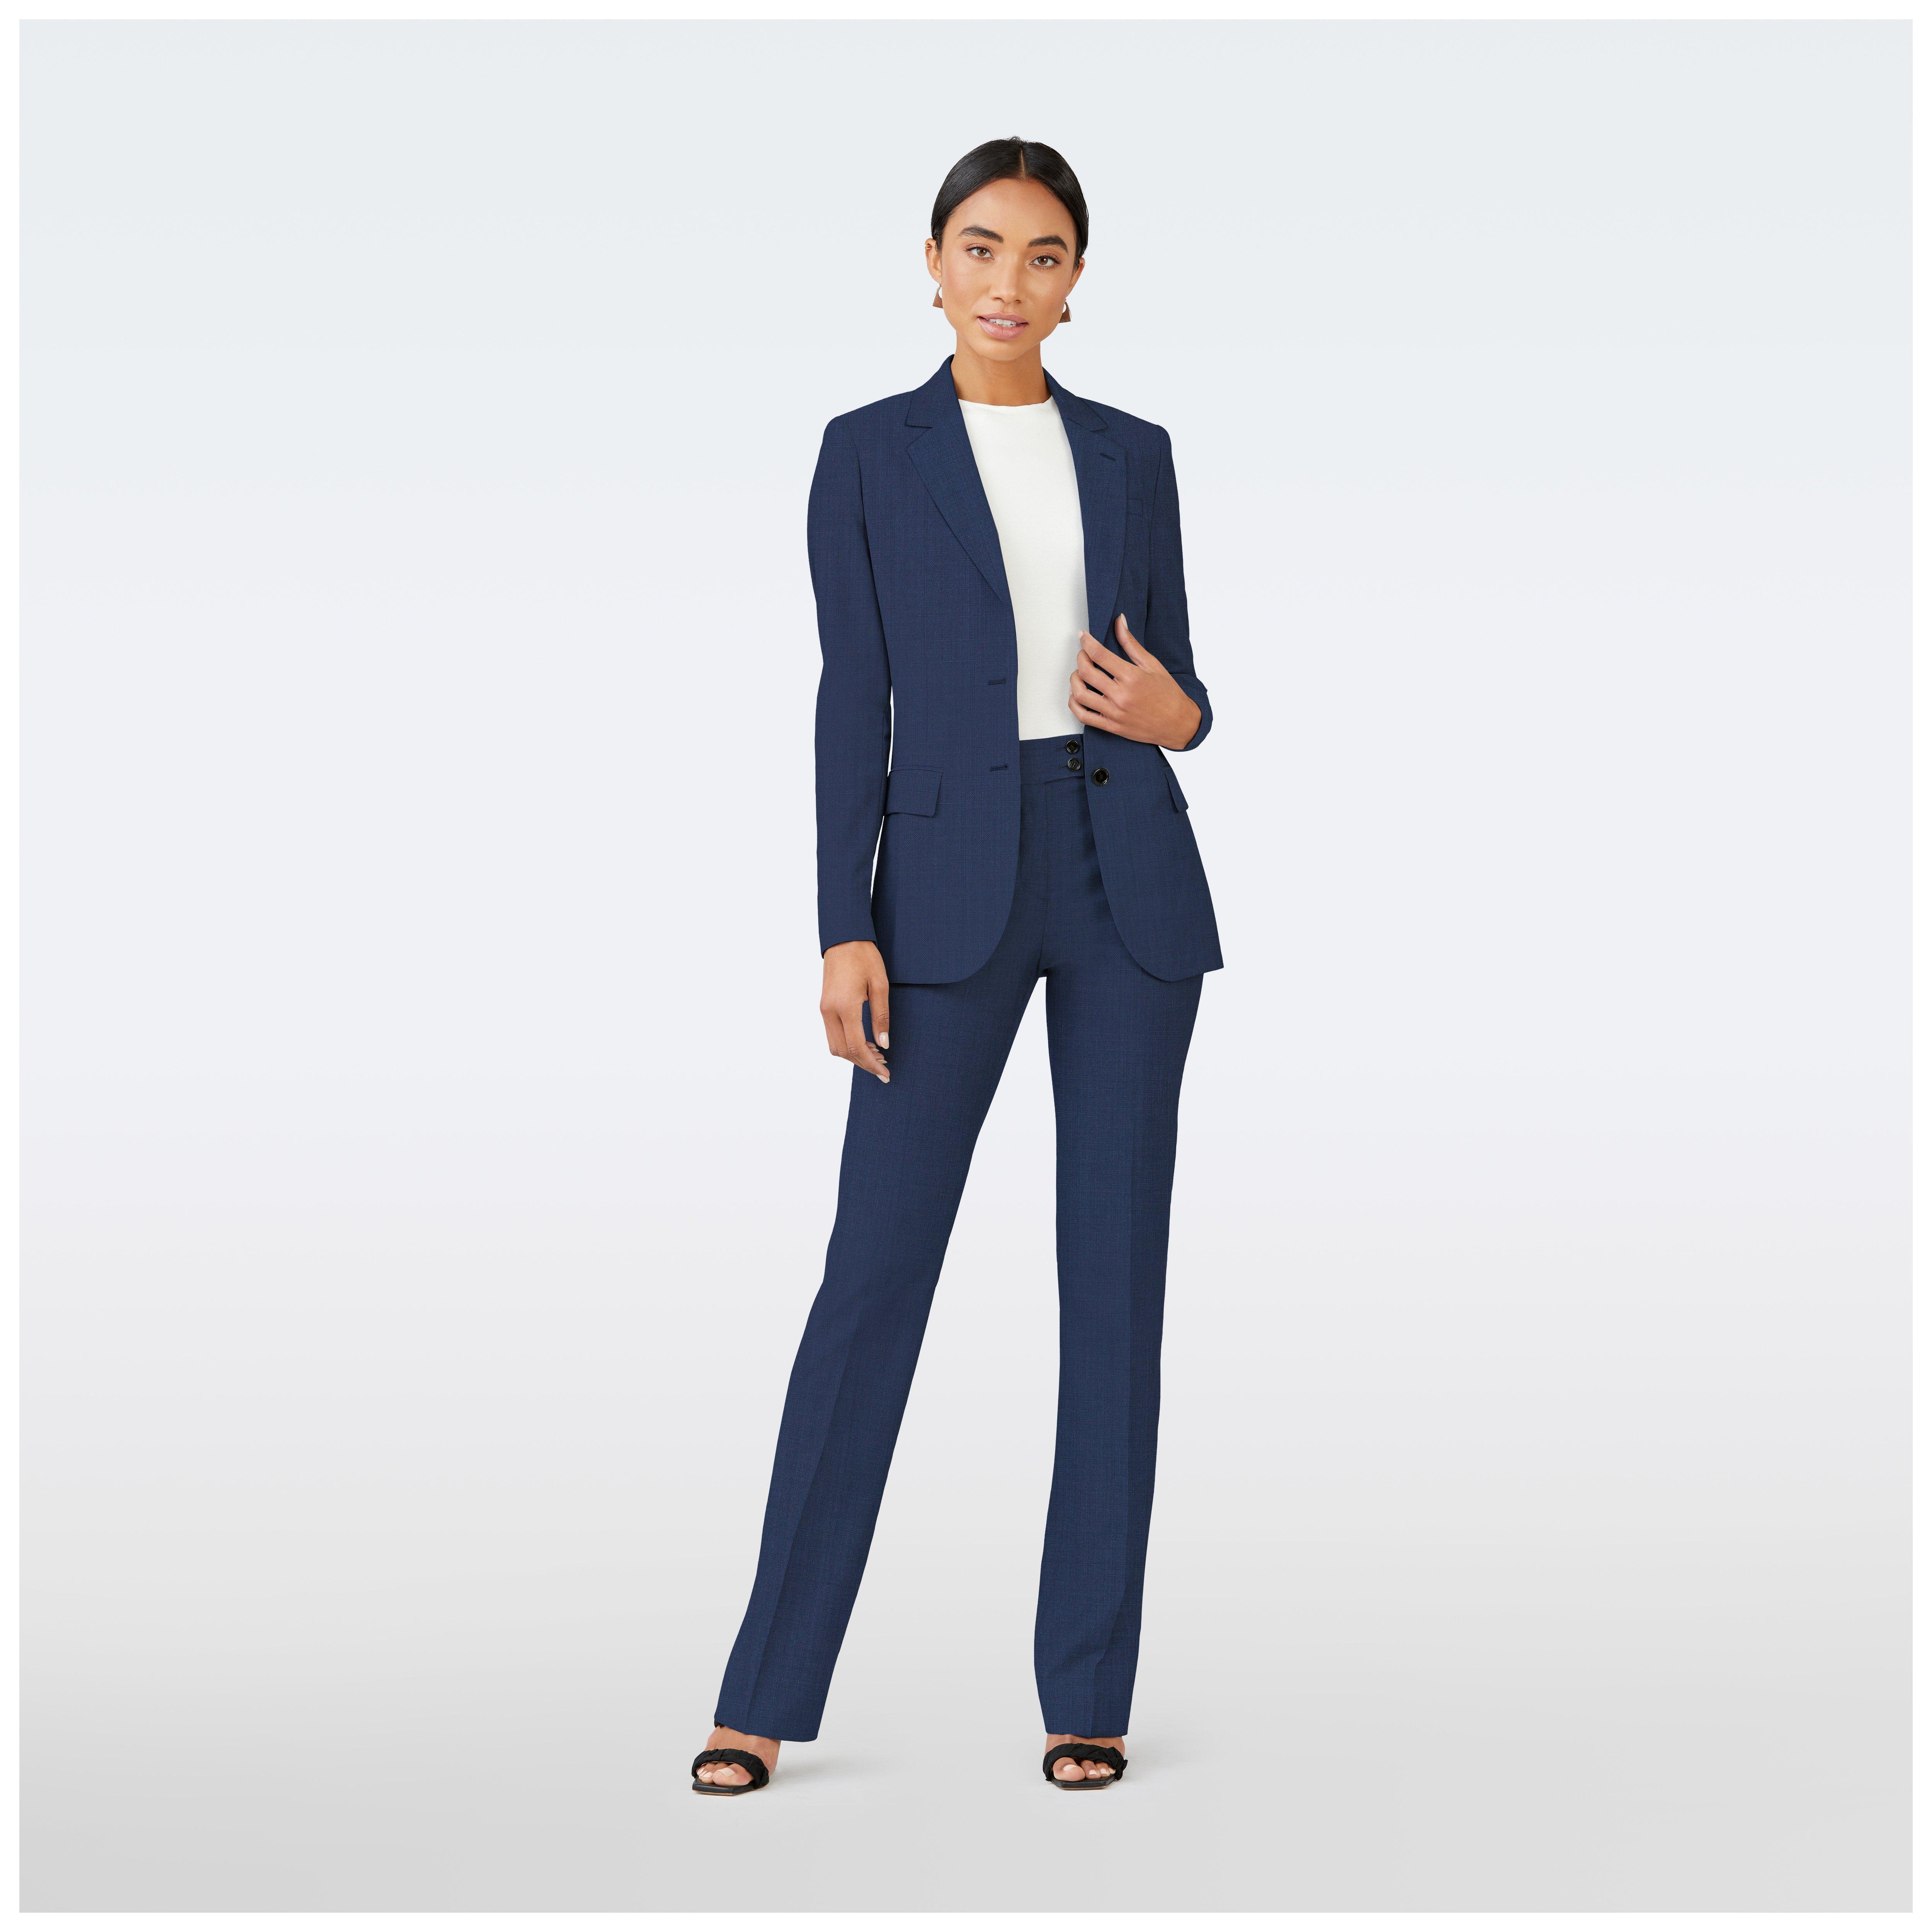 Blue Suits - Buy Blue Suits for Women Online in India